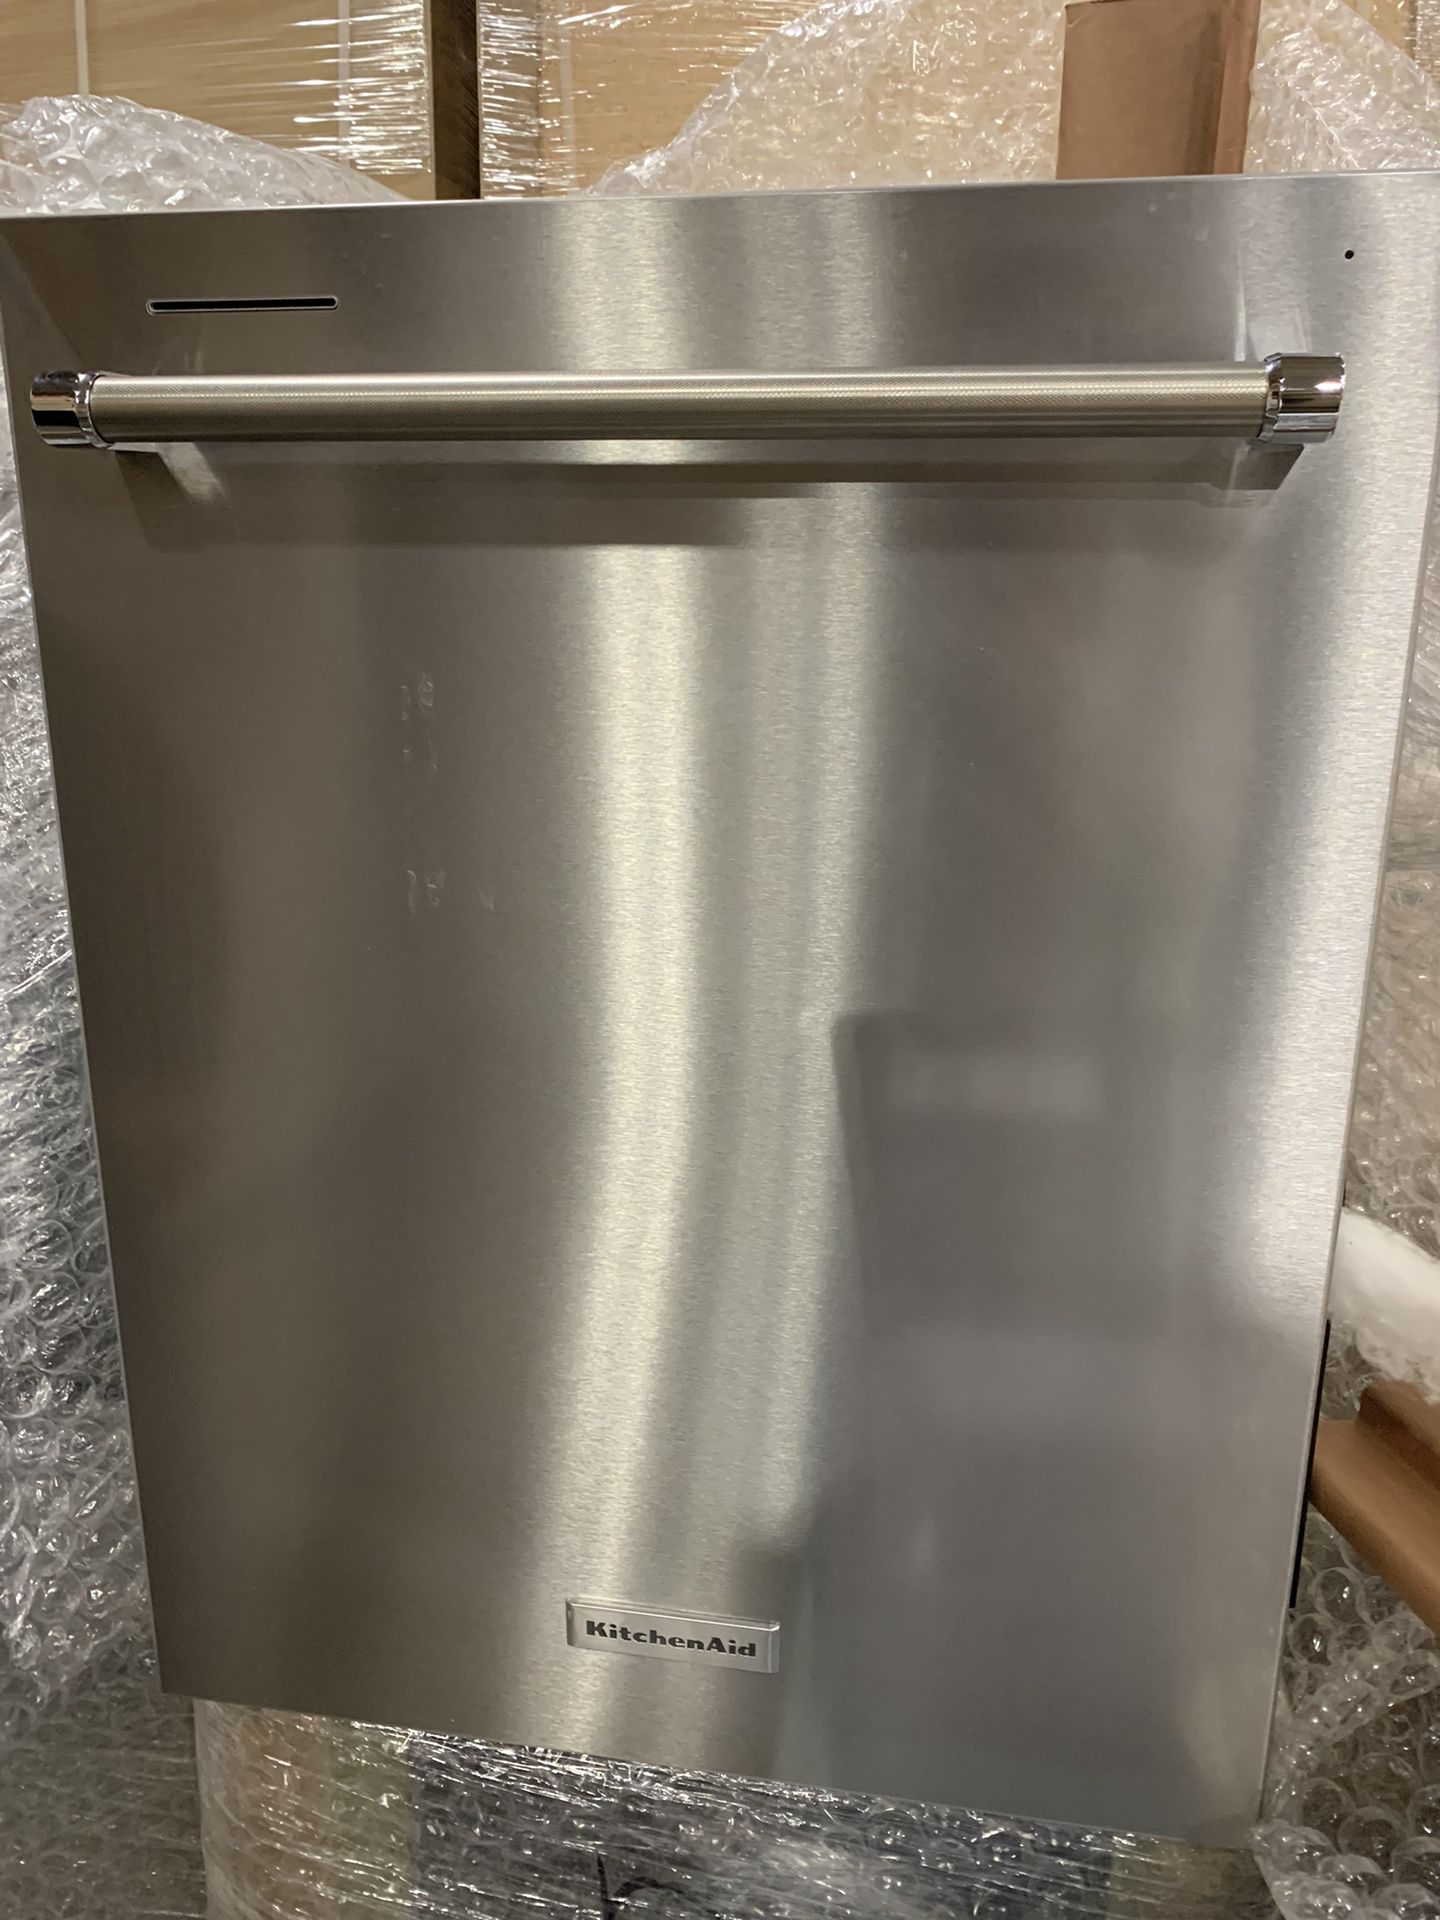 KitchenAid - 24" Top Control Built-In Dishwasher with Stainless Steel Tub, PrintShield Finish, 3rd Rack, 39 dBA - Stainless Steel 